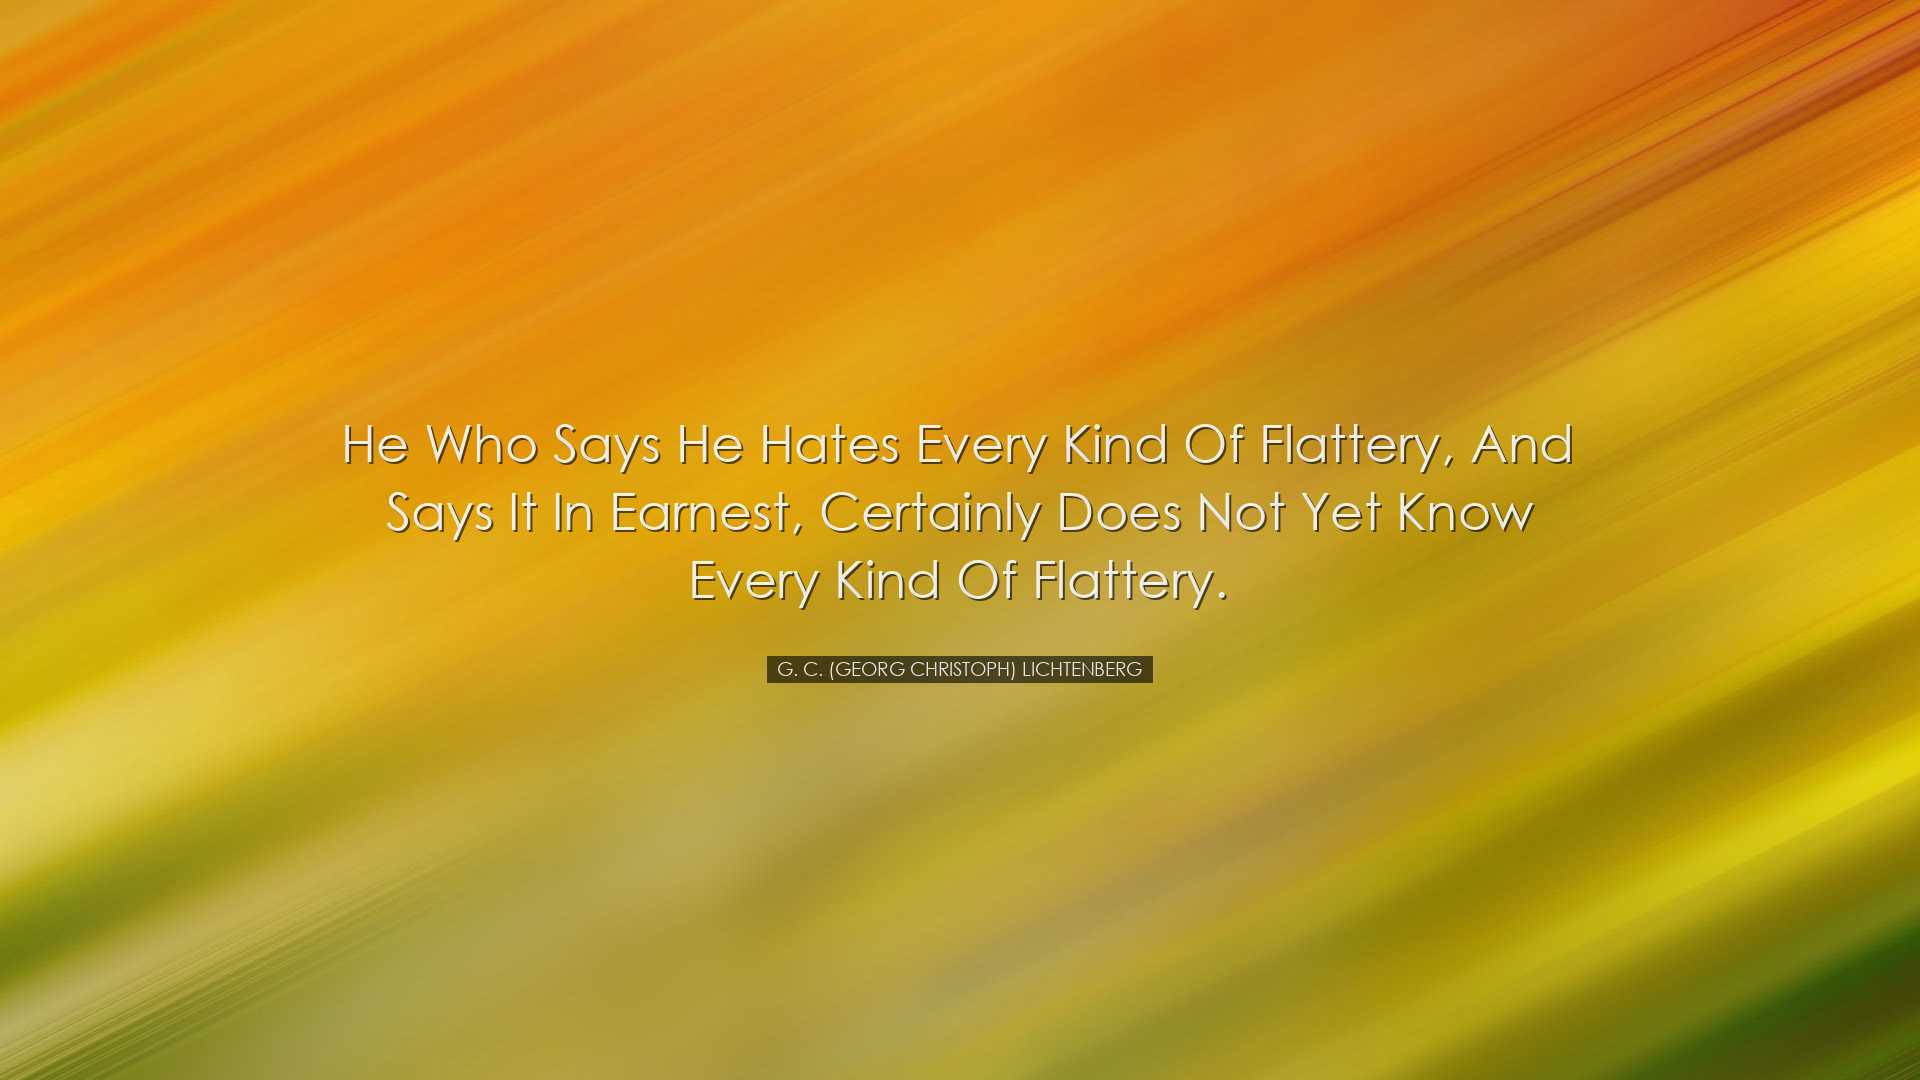 He who says he hates every kind of flattery, and says it in earnes